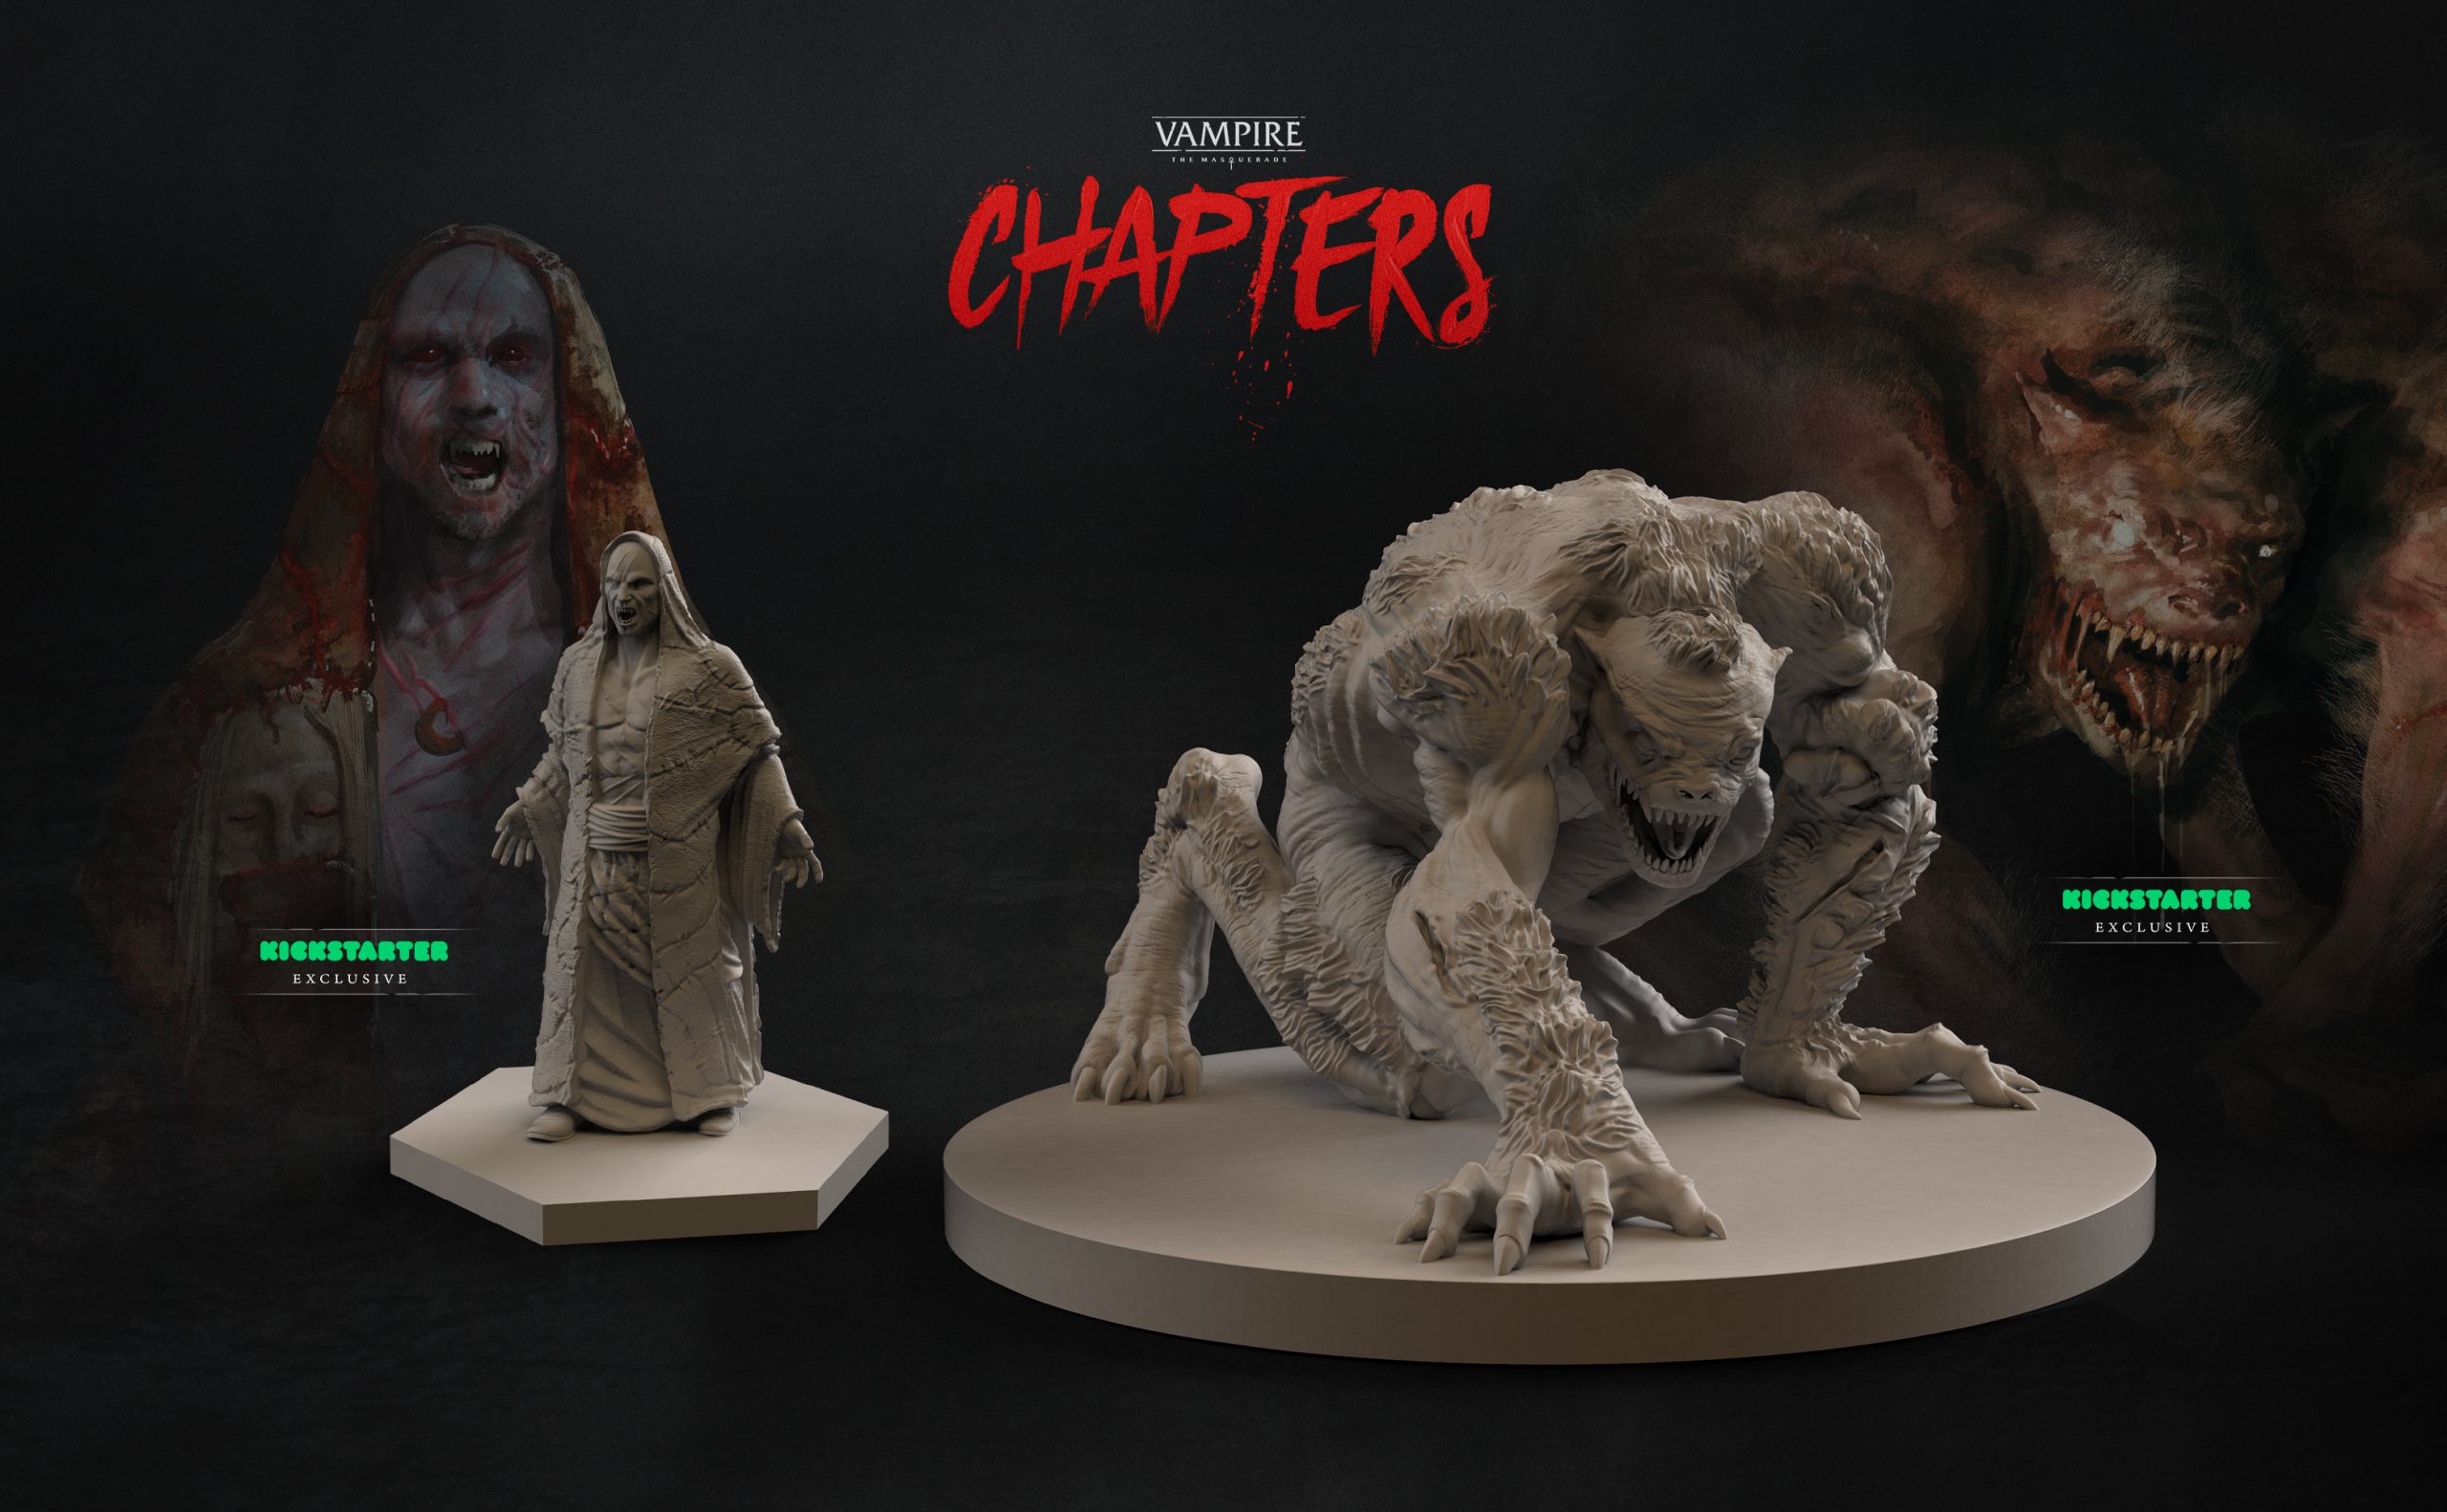 Vampire: The Masquerade outdoes Gloomhaven with giant new campaign